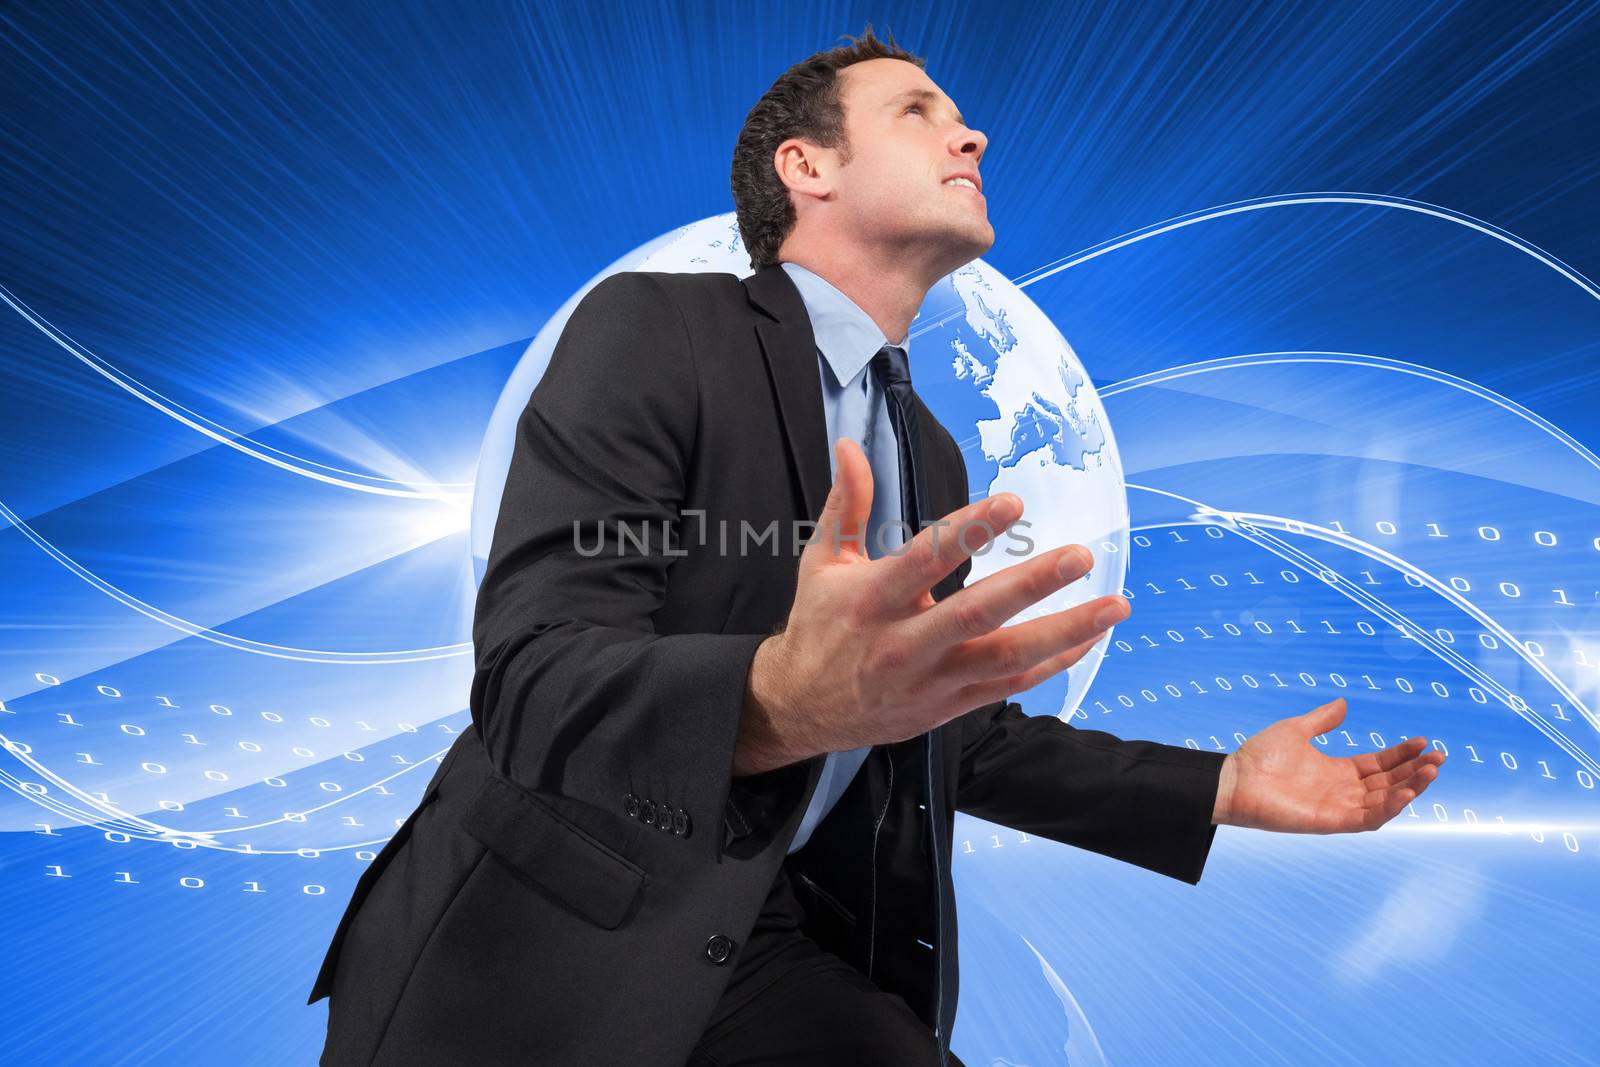 Composite image of businessman posing with arms out by Wavebreakmedia